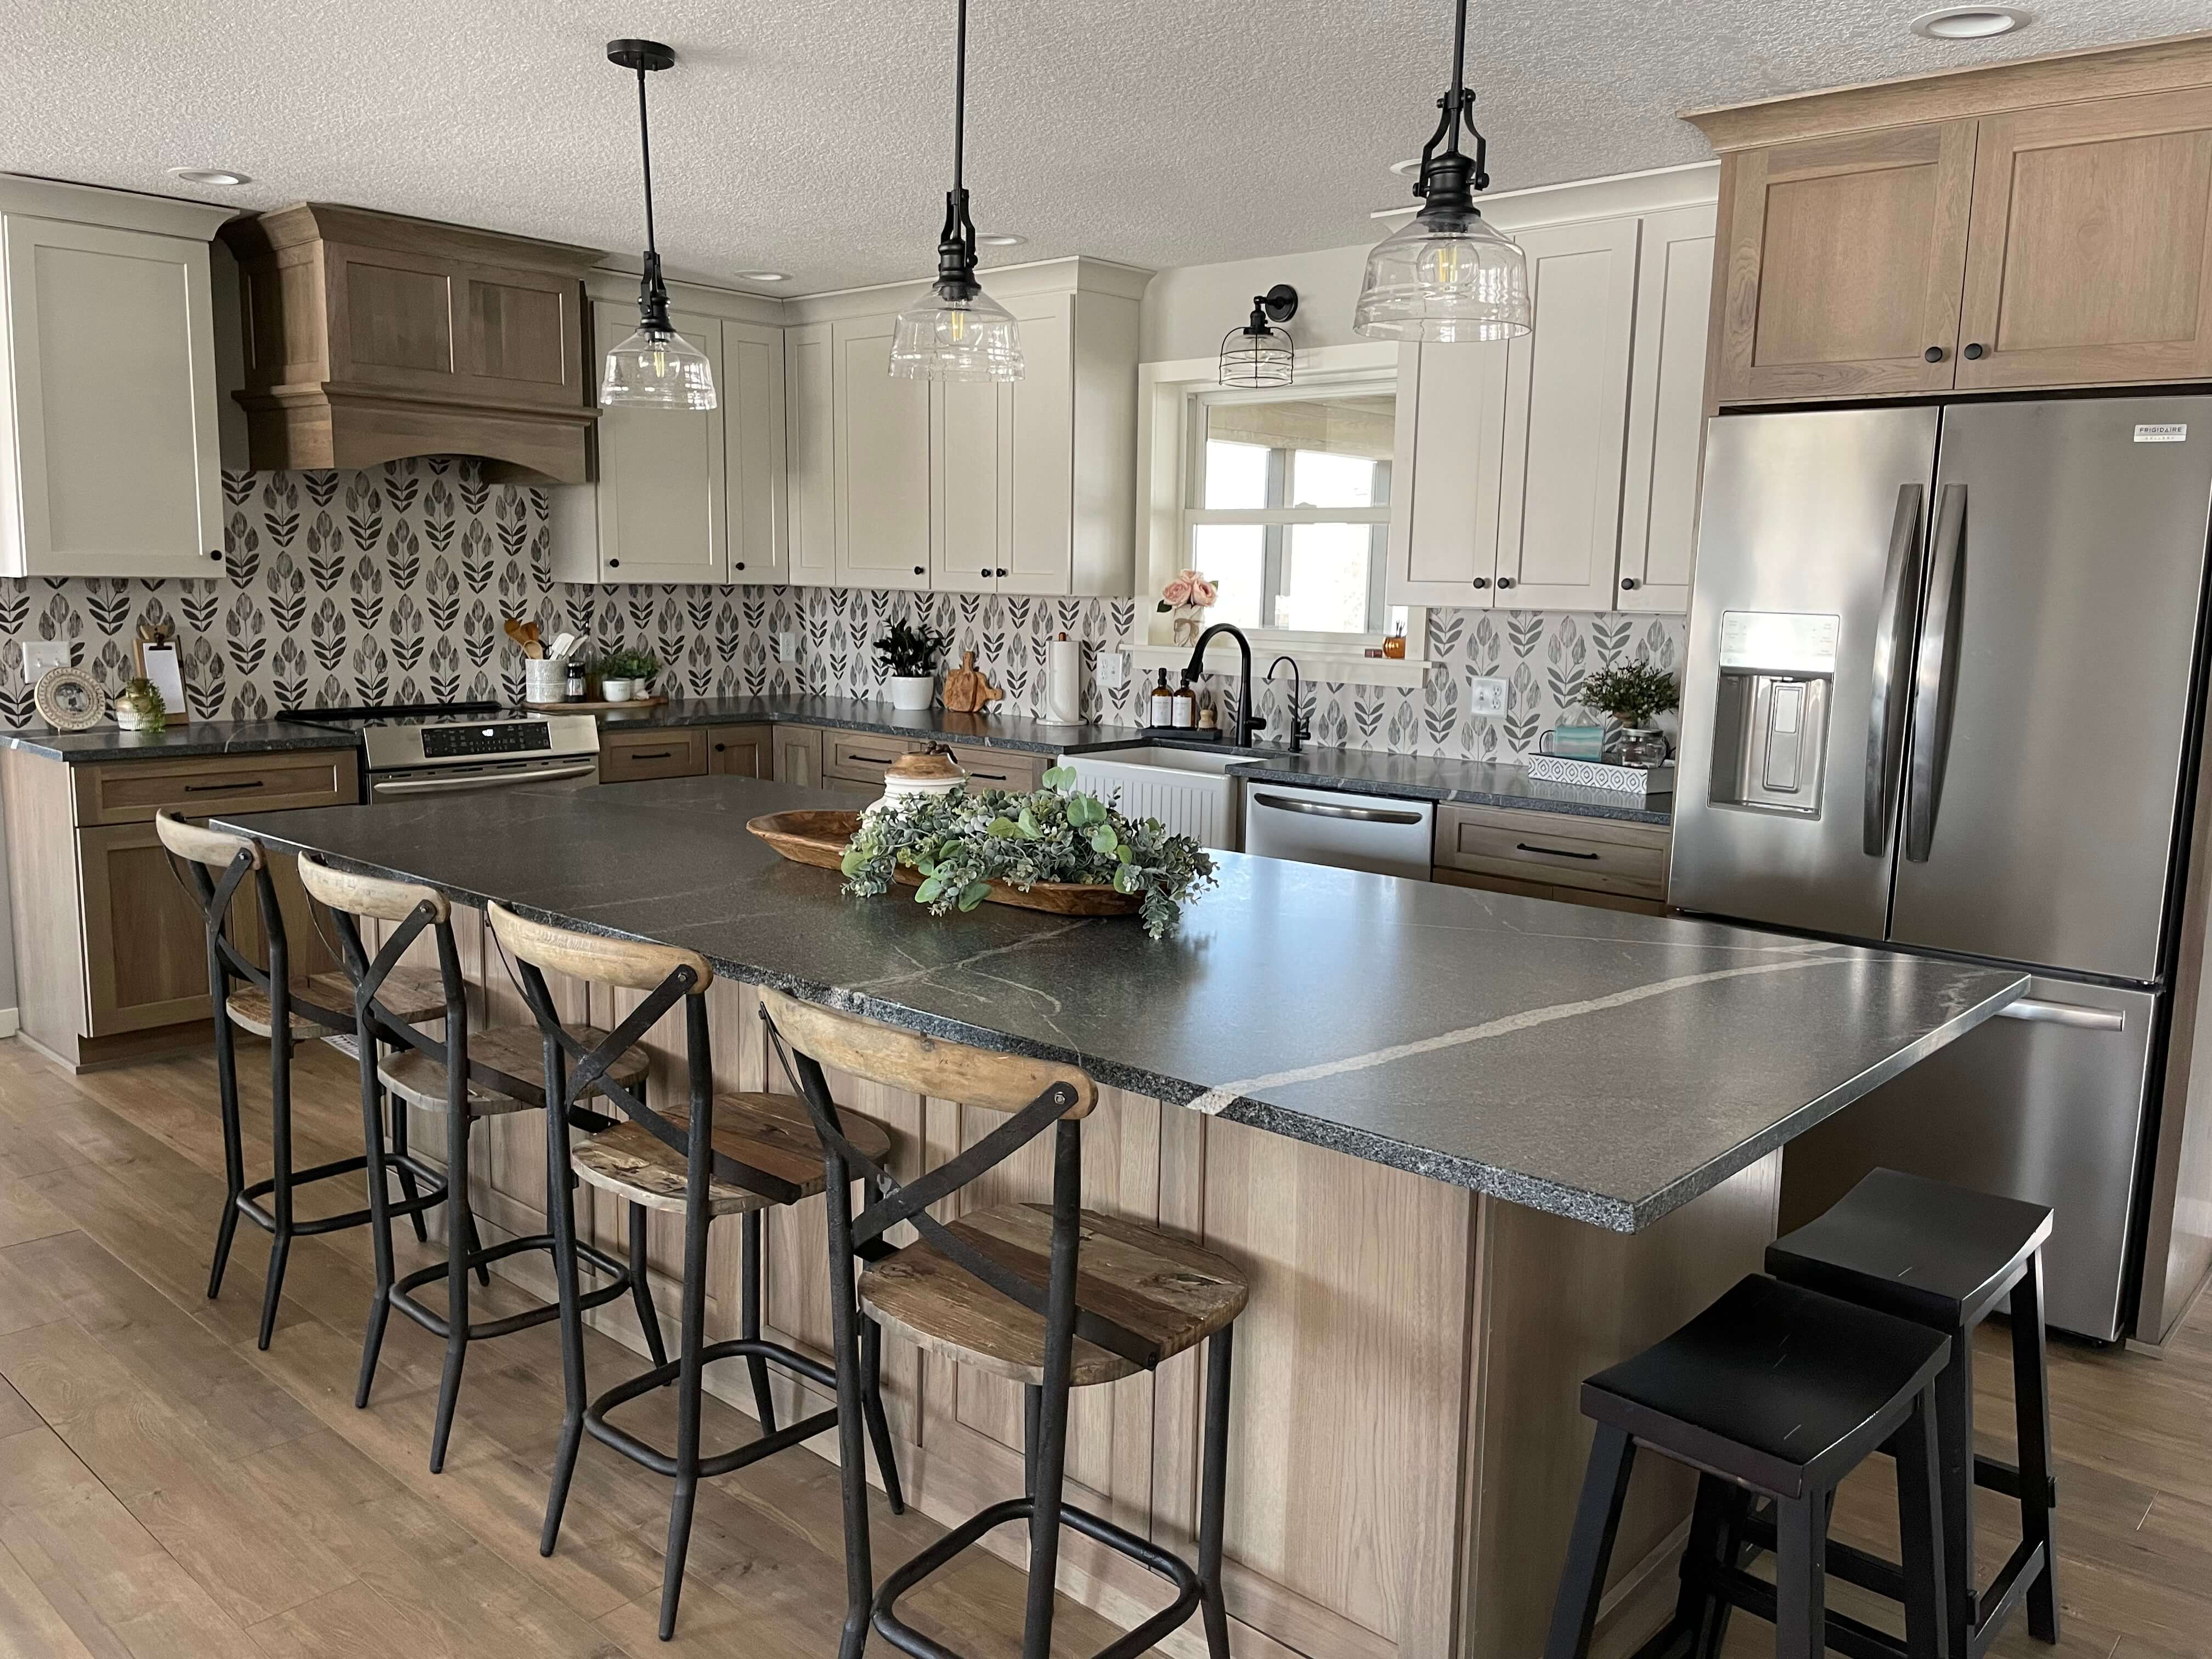 Kitchen Stories: A Remodel Worthy of the Investment - Dura Supreme ...